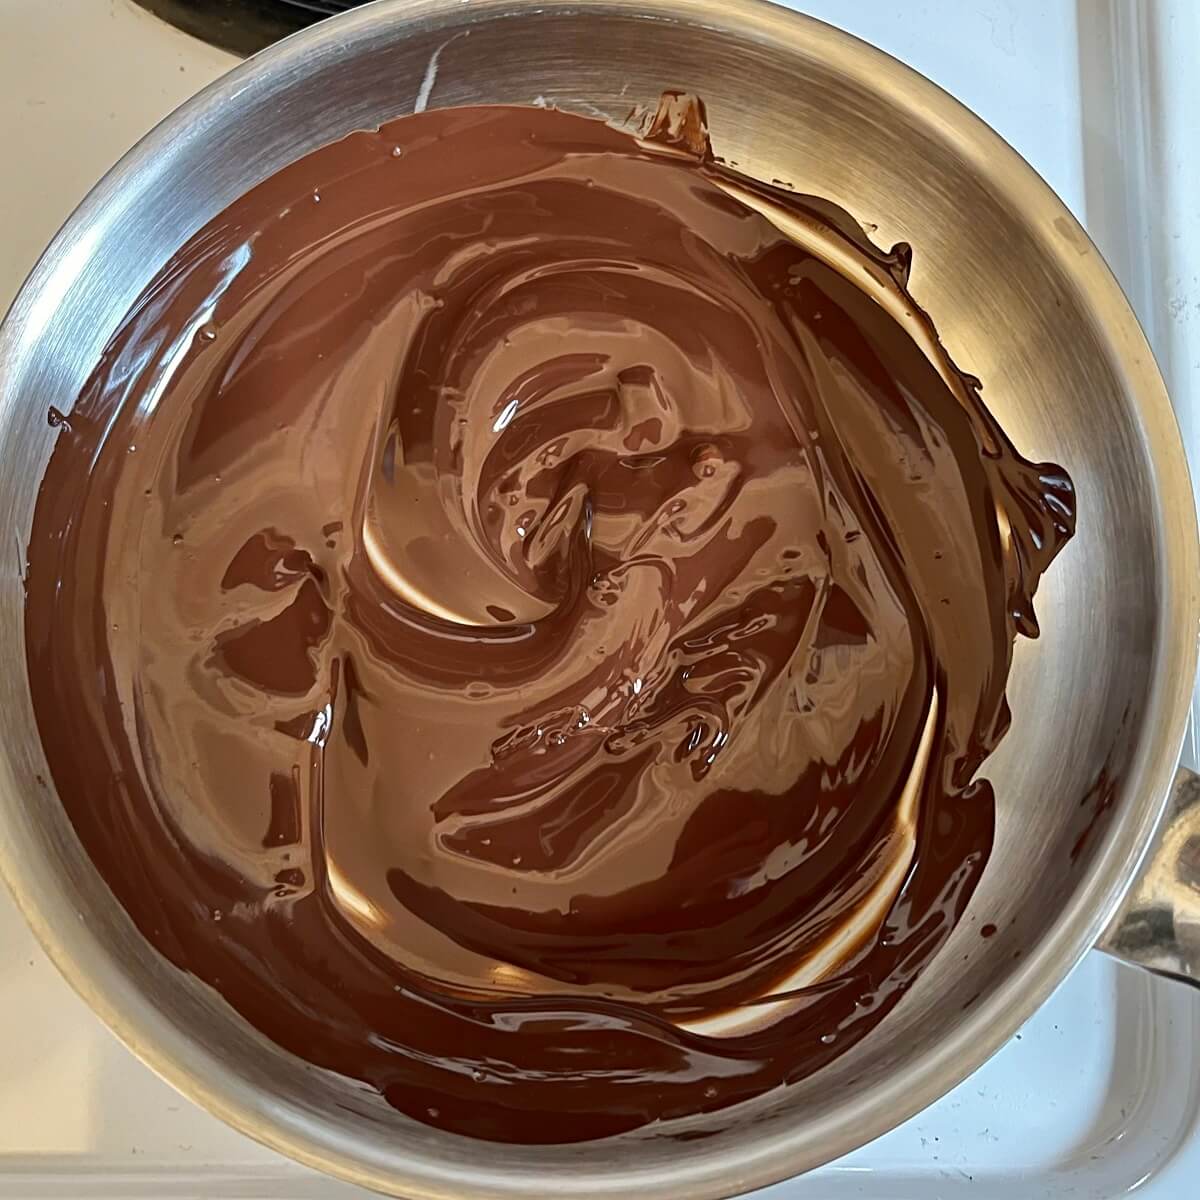 Melted dark chocolate in a metal pan.